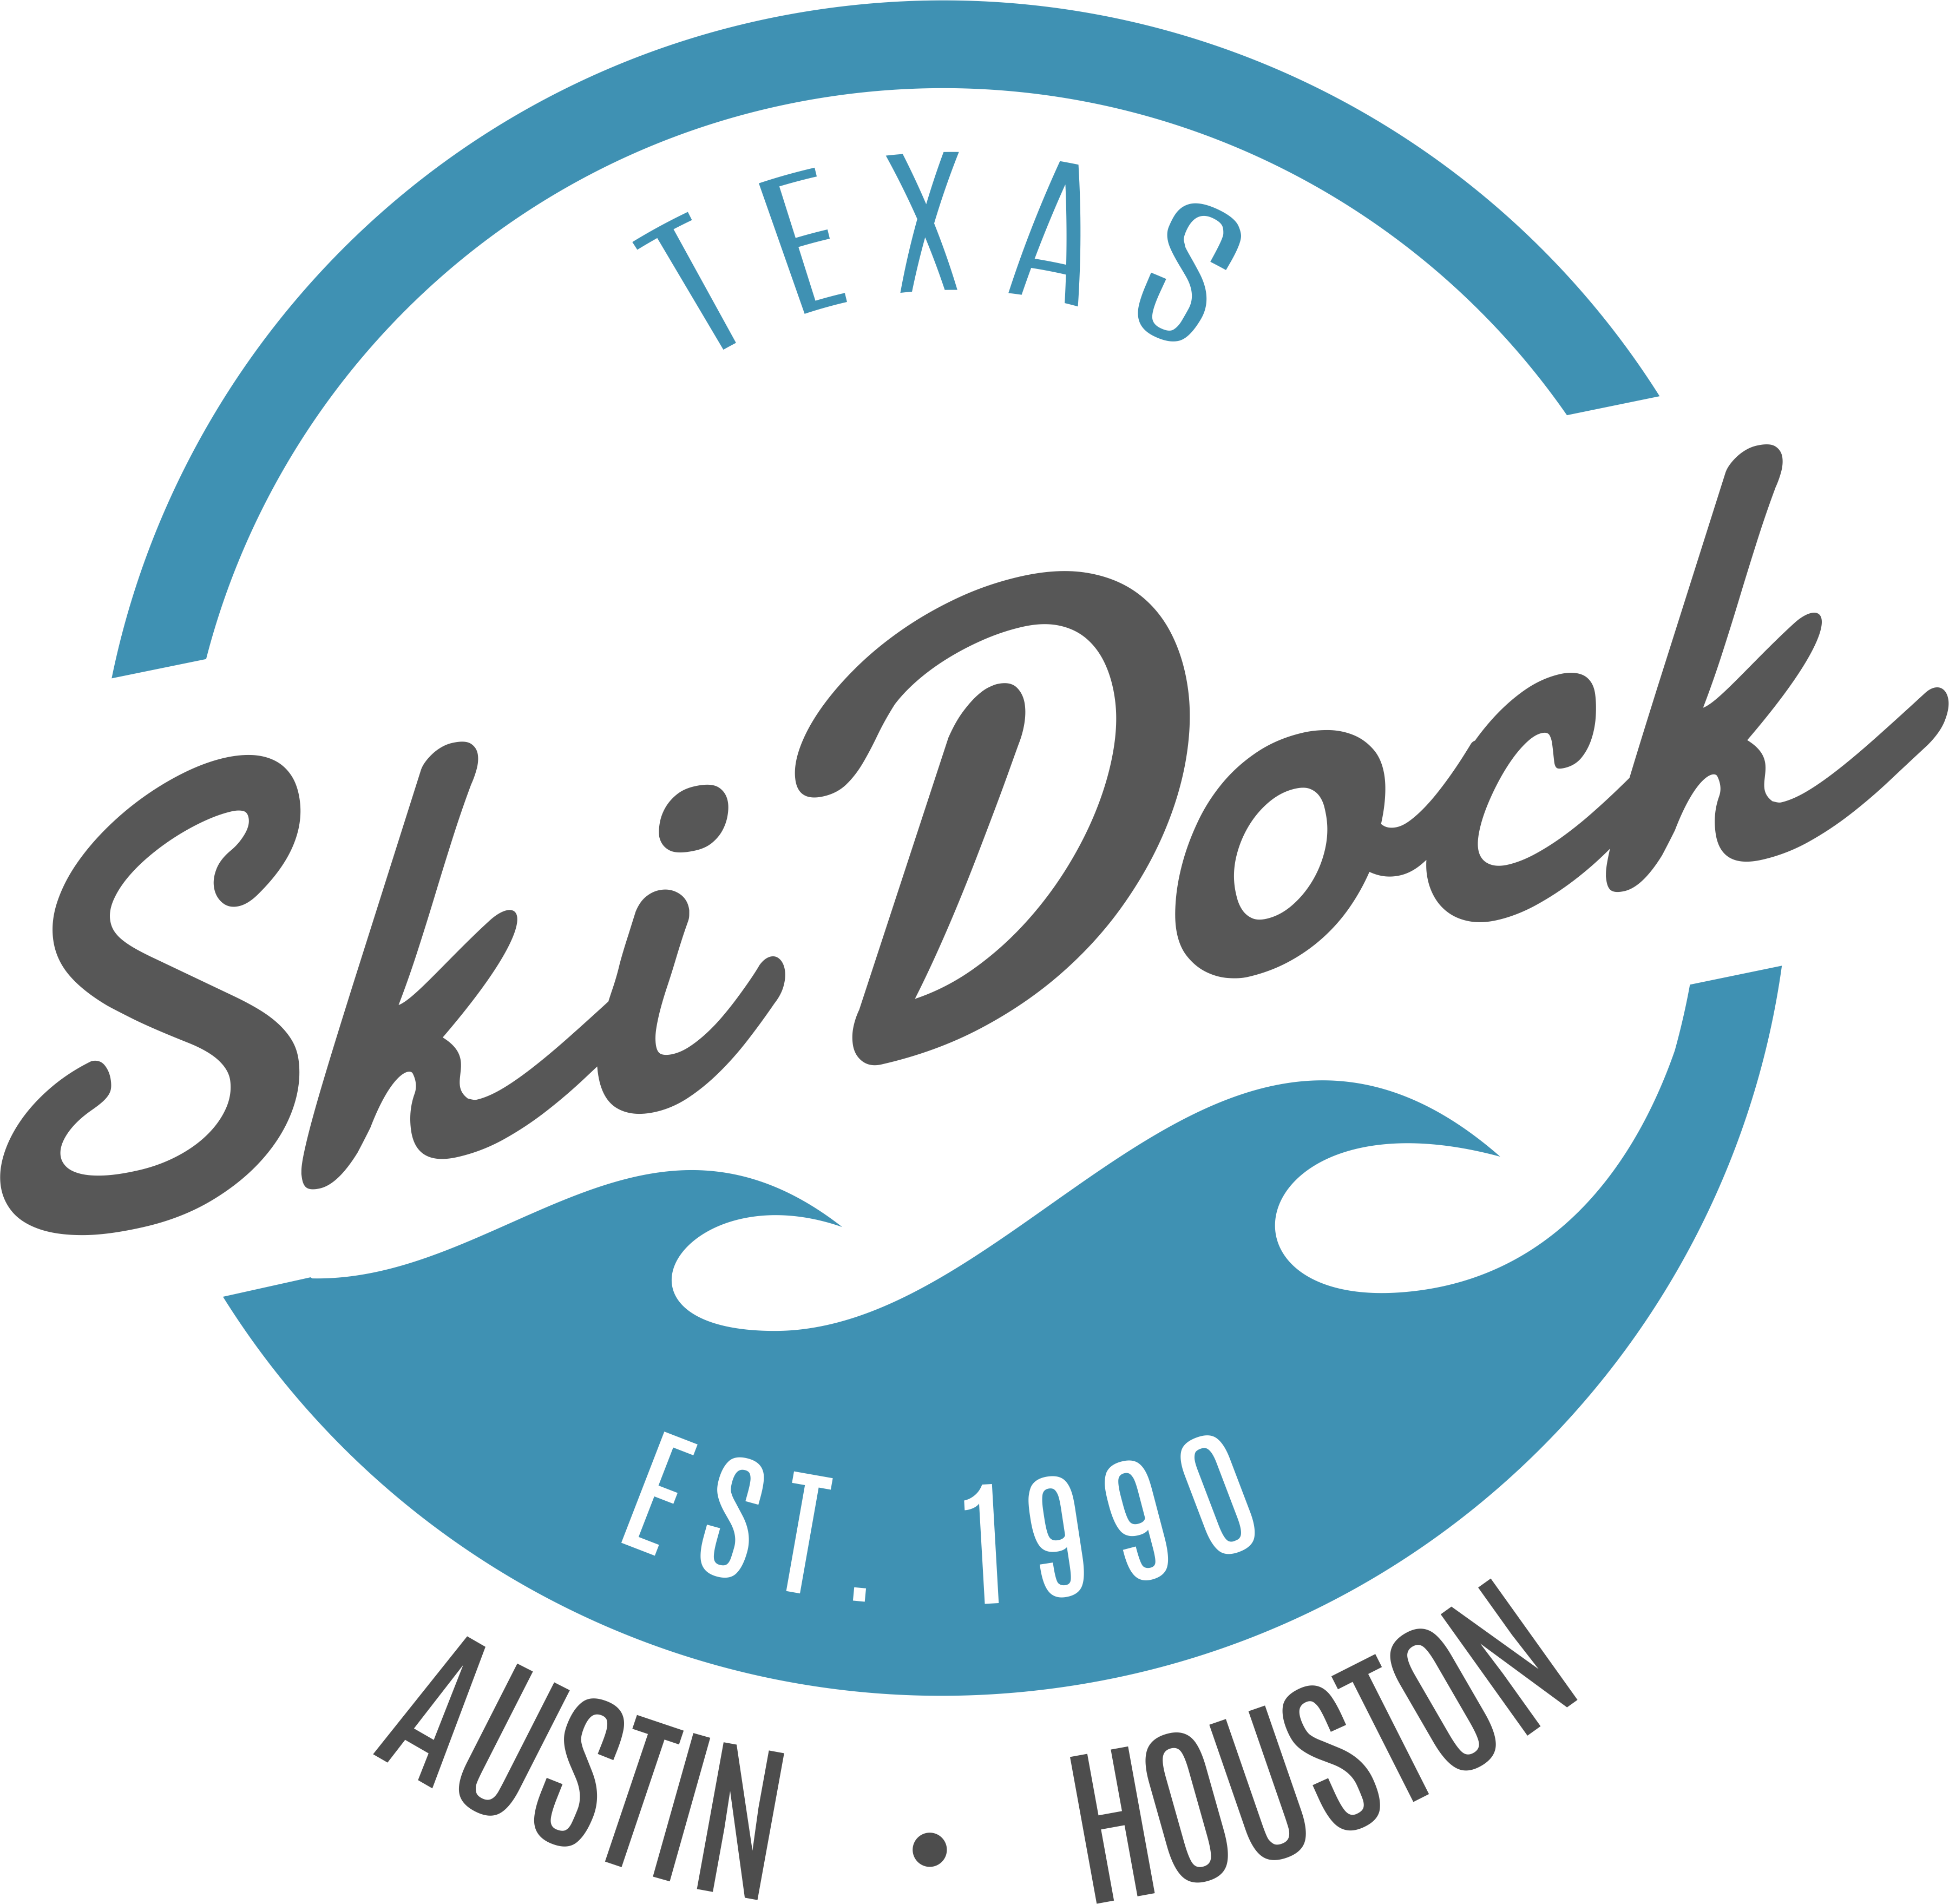 The logo for The Come and Take it Conroe Classic ski dock in Austin, Texas.